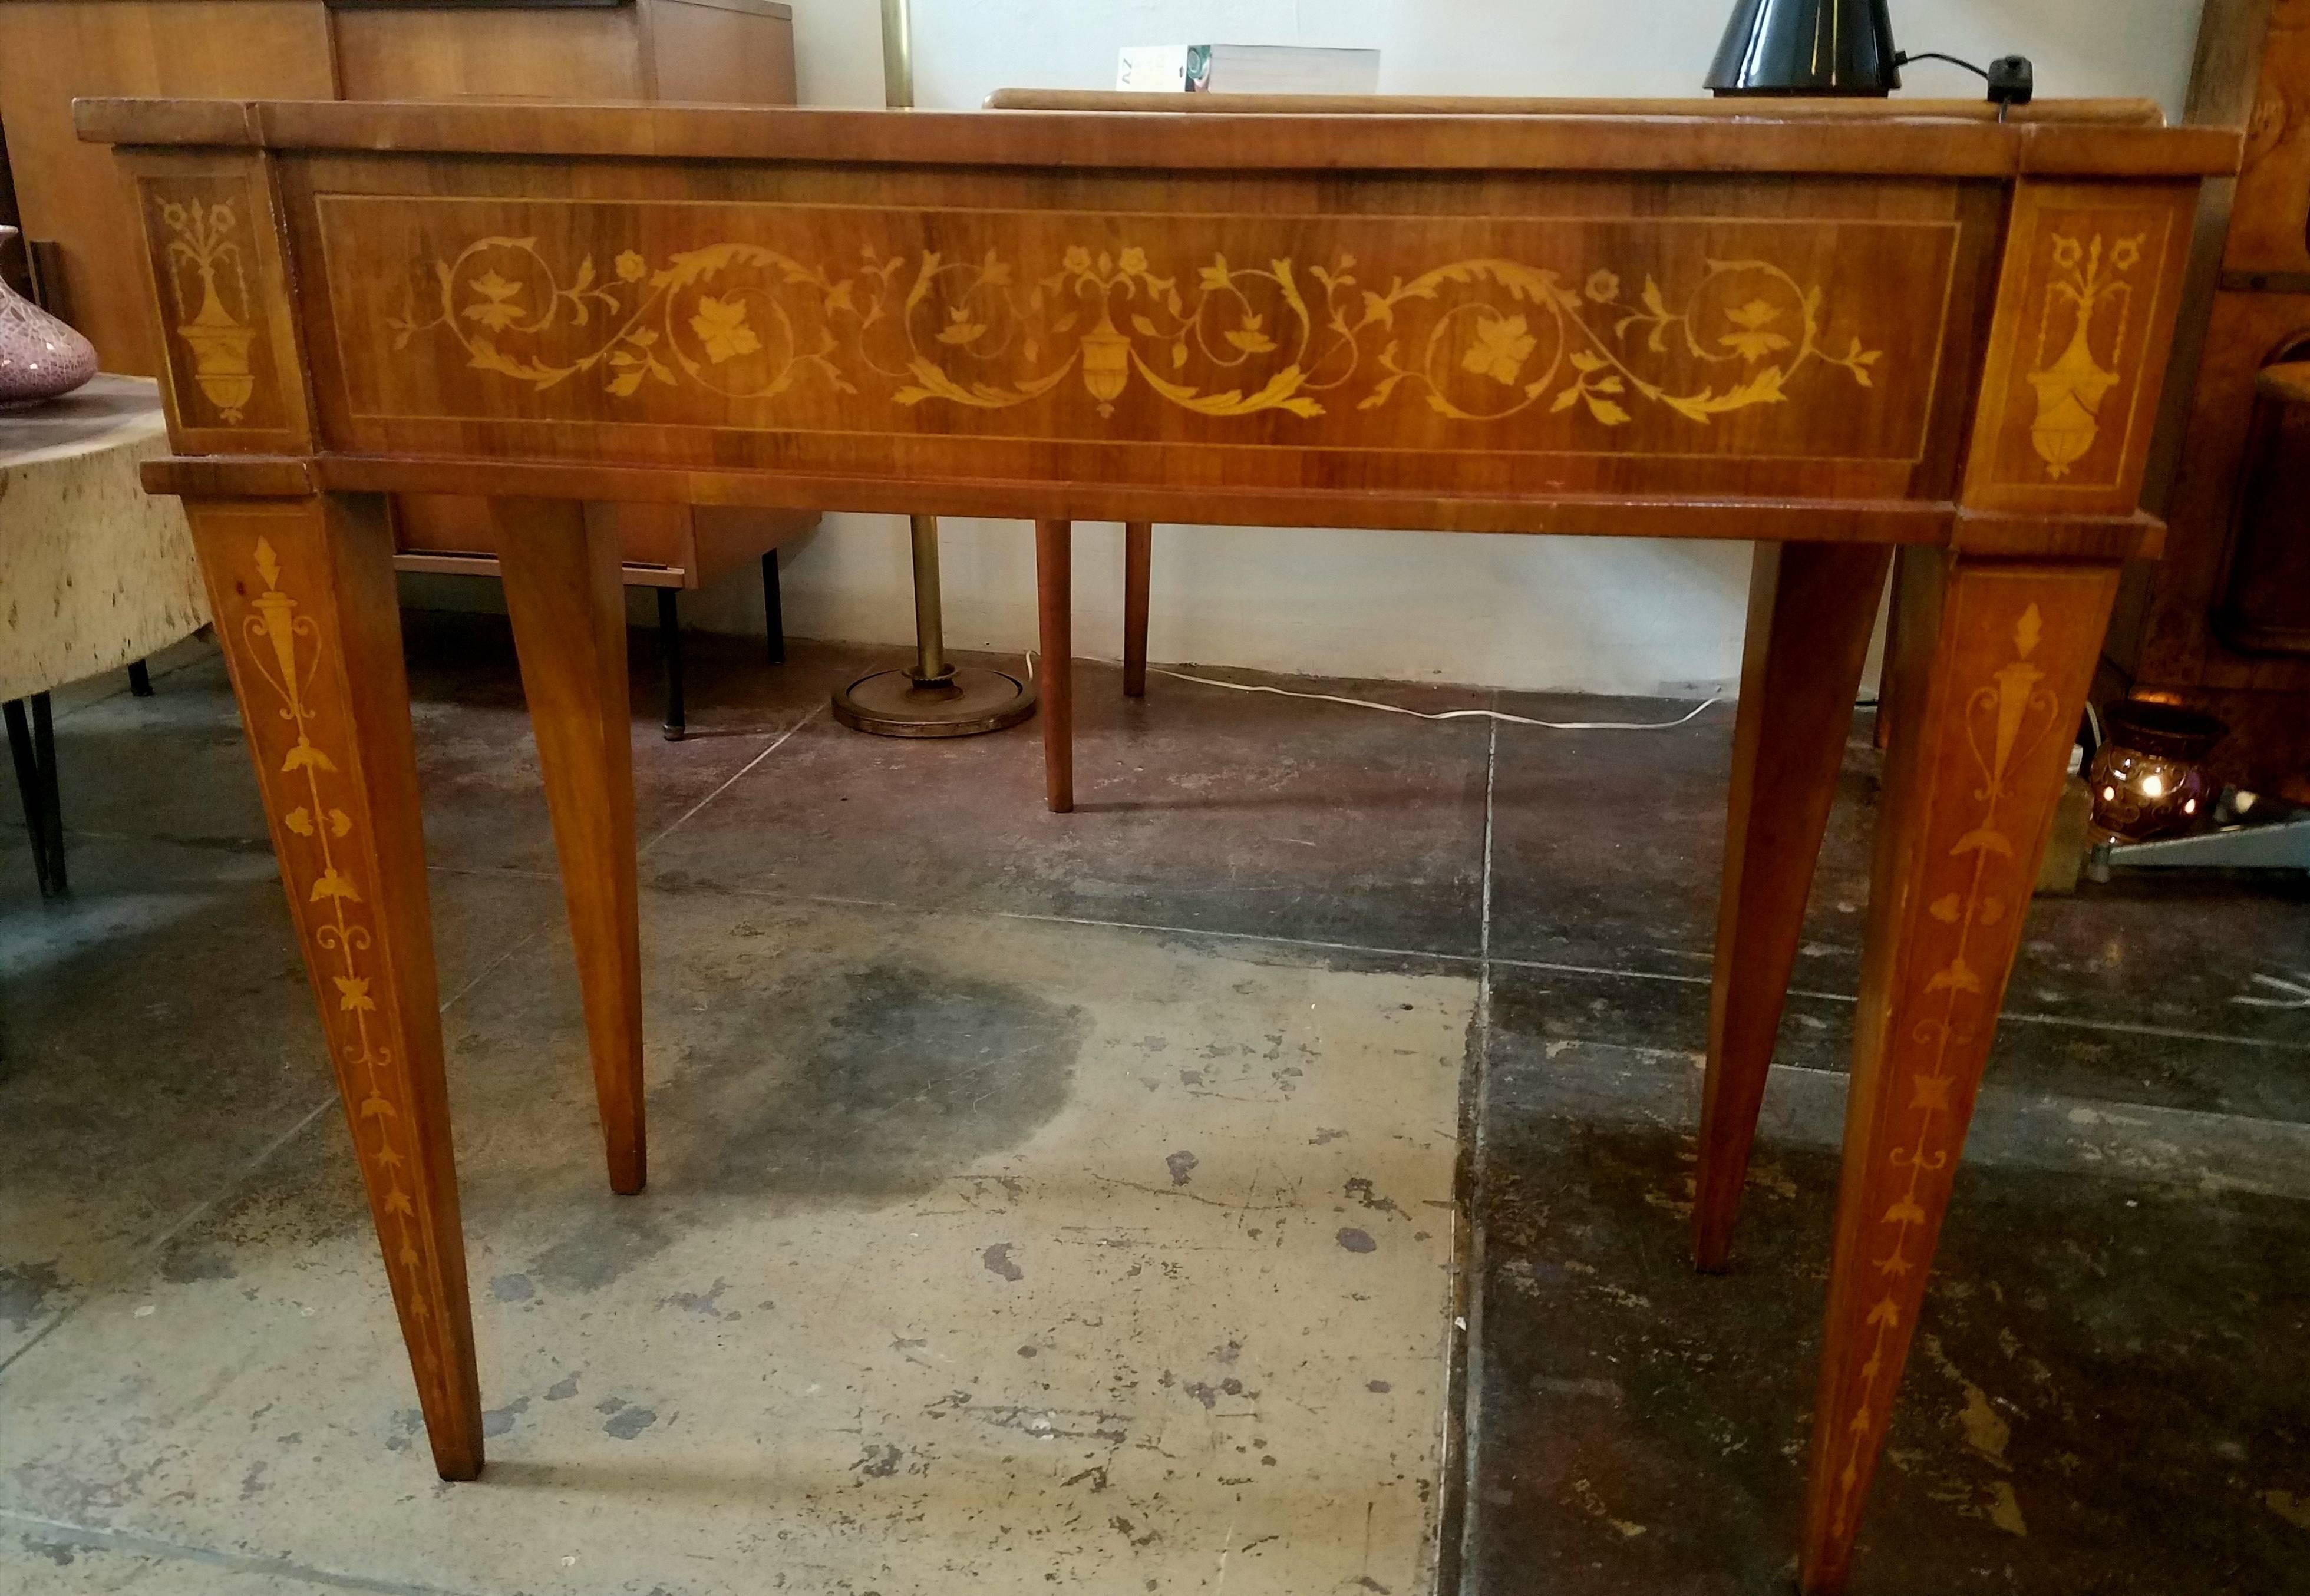 Neoclassical Revival Marquetry Inlaid Entry Table in Neoclassical Style